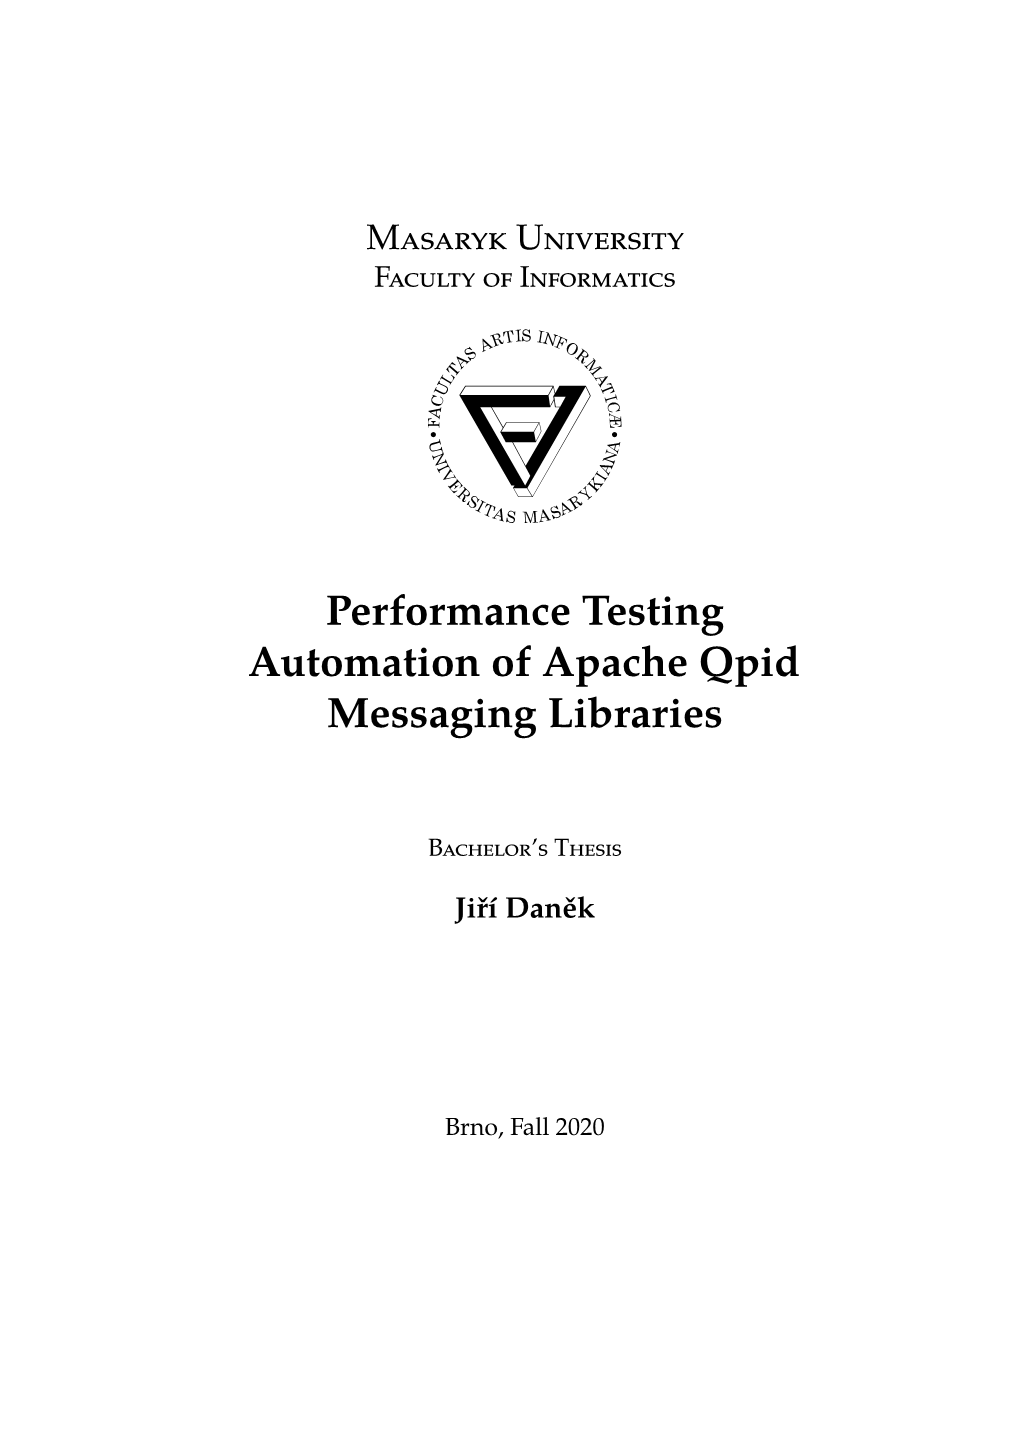 Performance Testing Automation of Apache Qpid Messaging Libraries